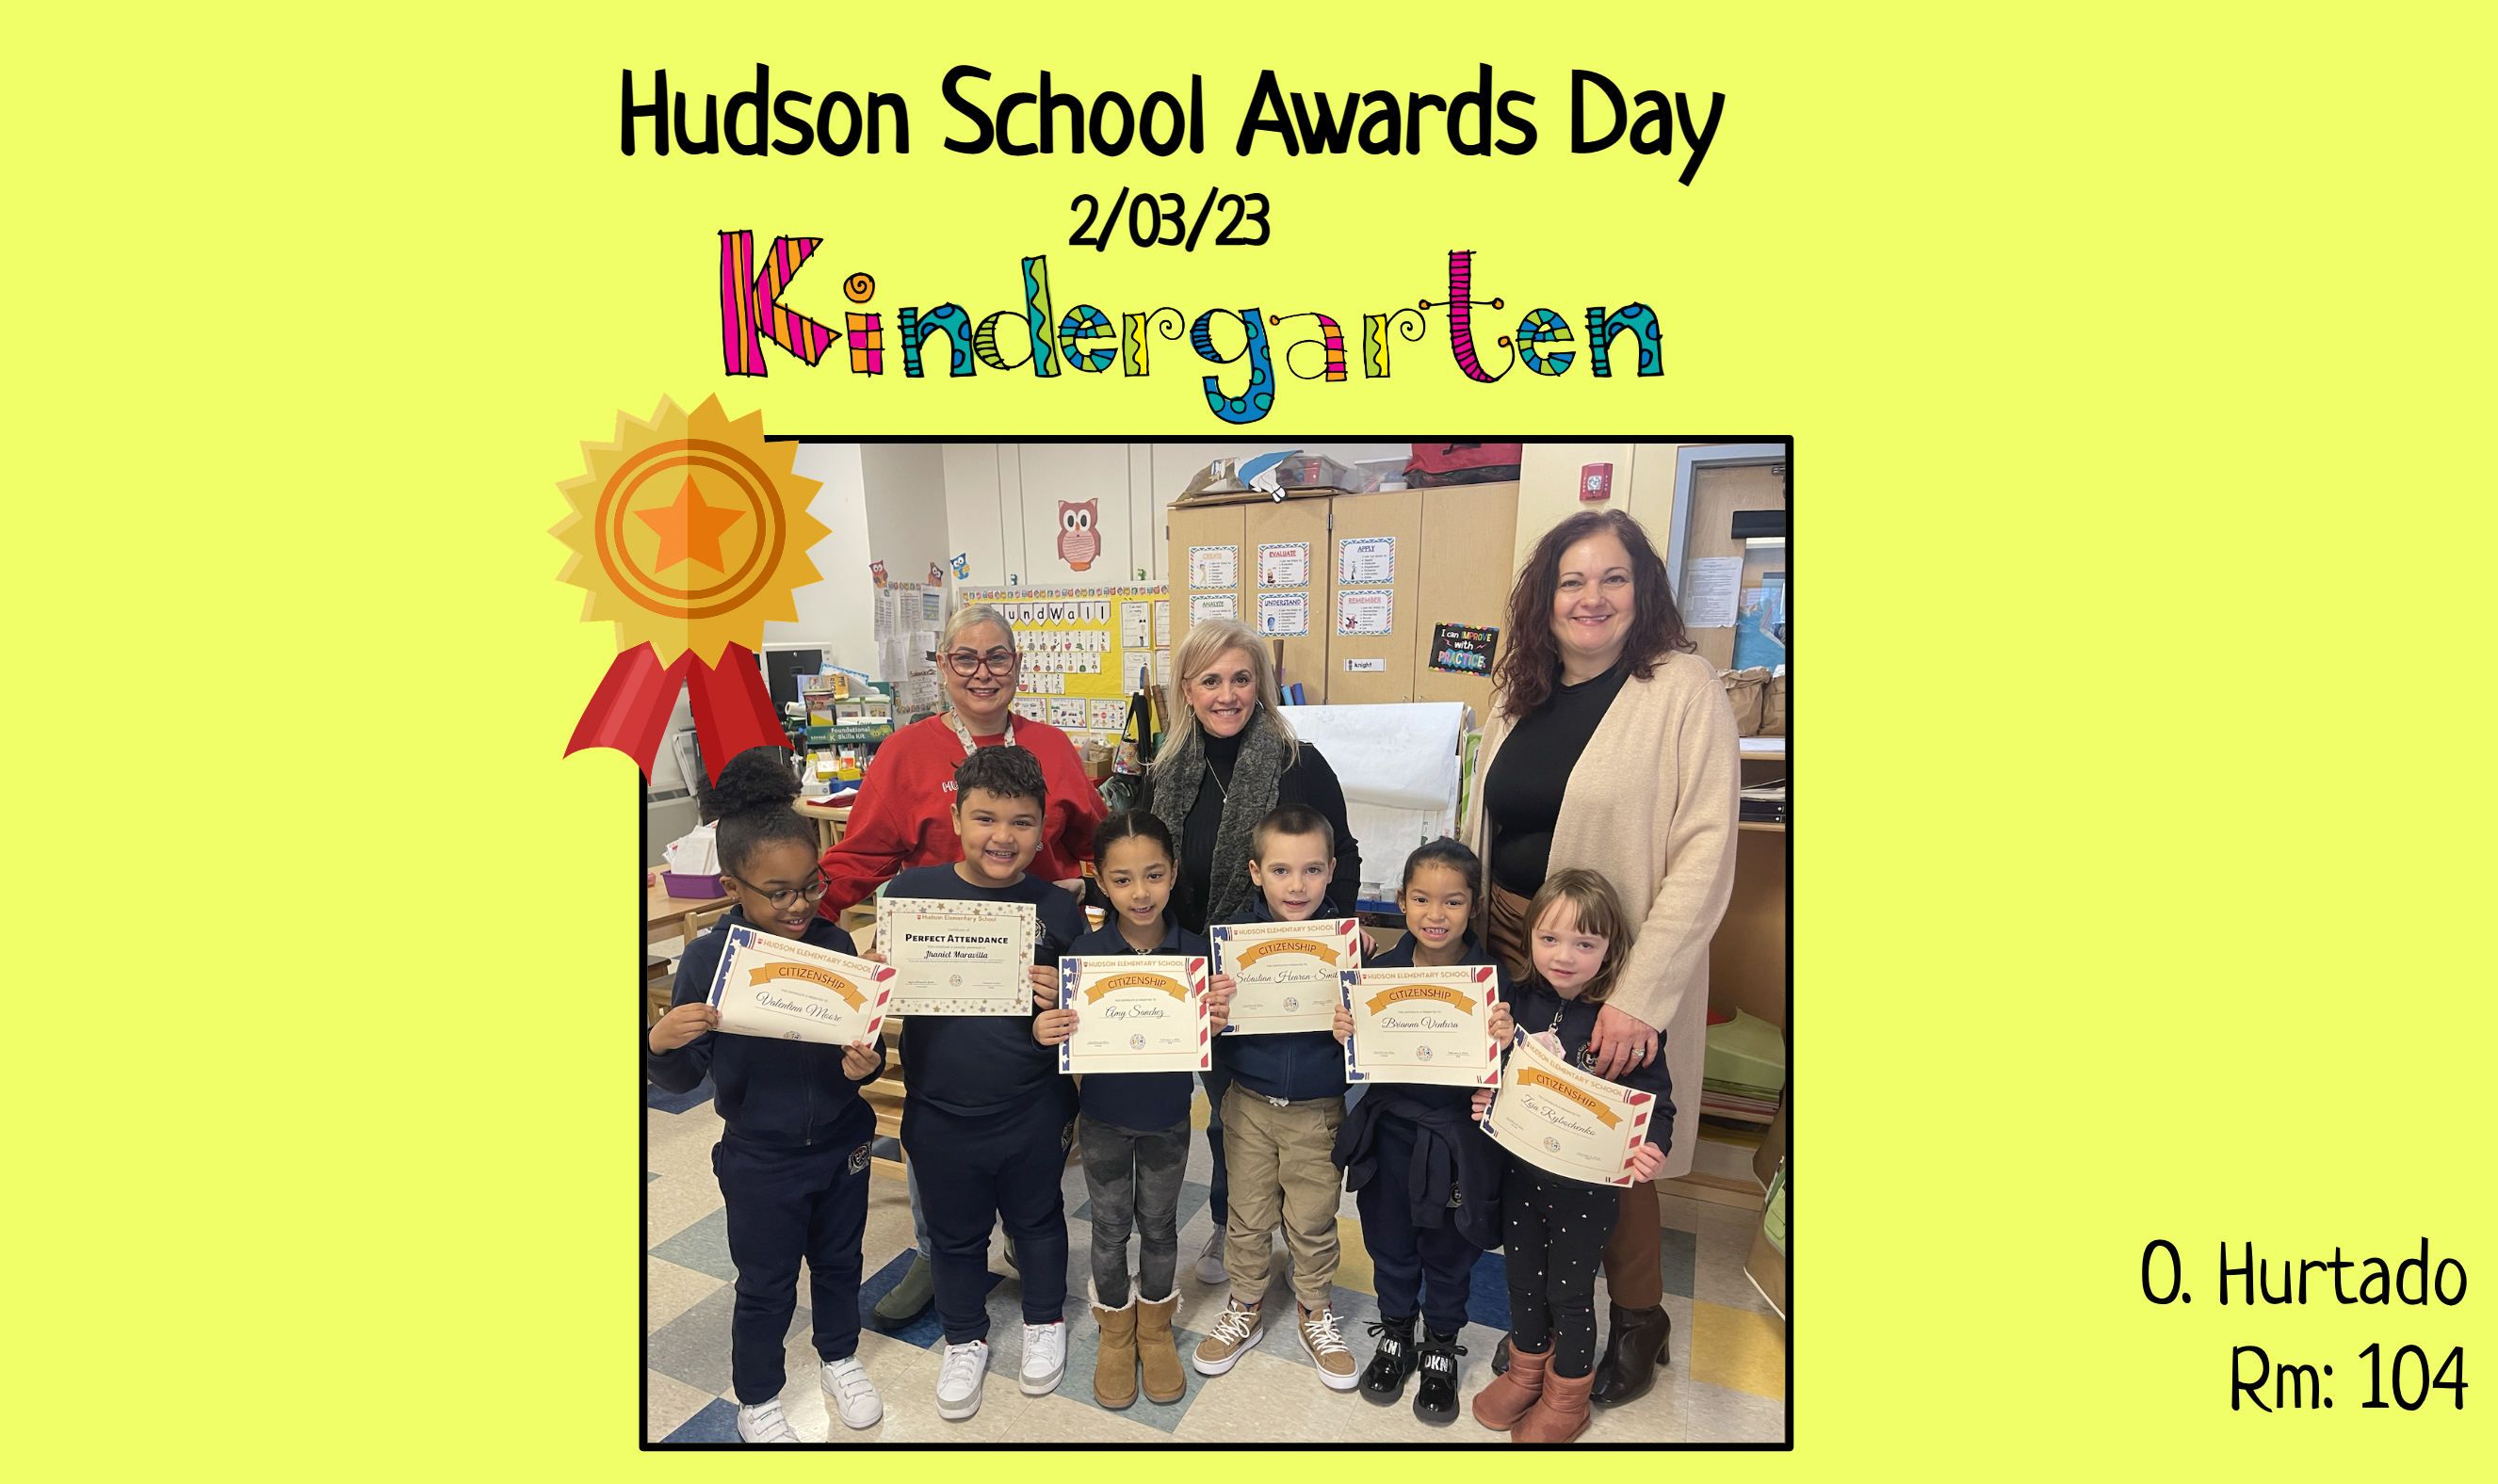 2nd Marking Period Achievements at the Henry Hudson School